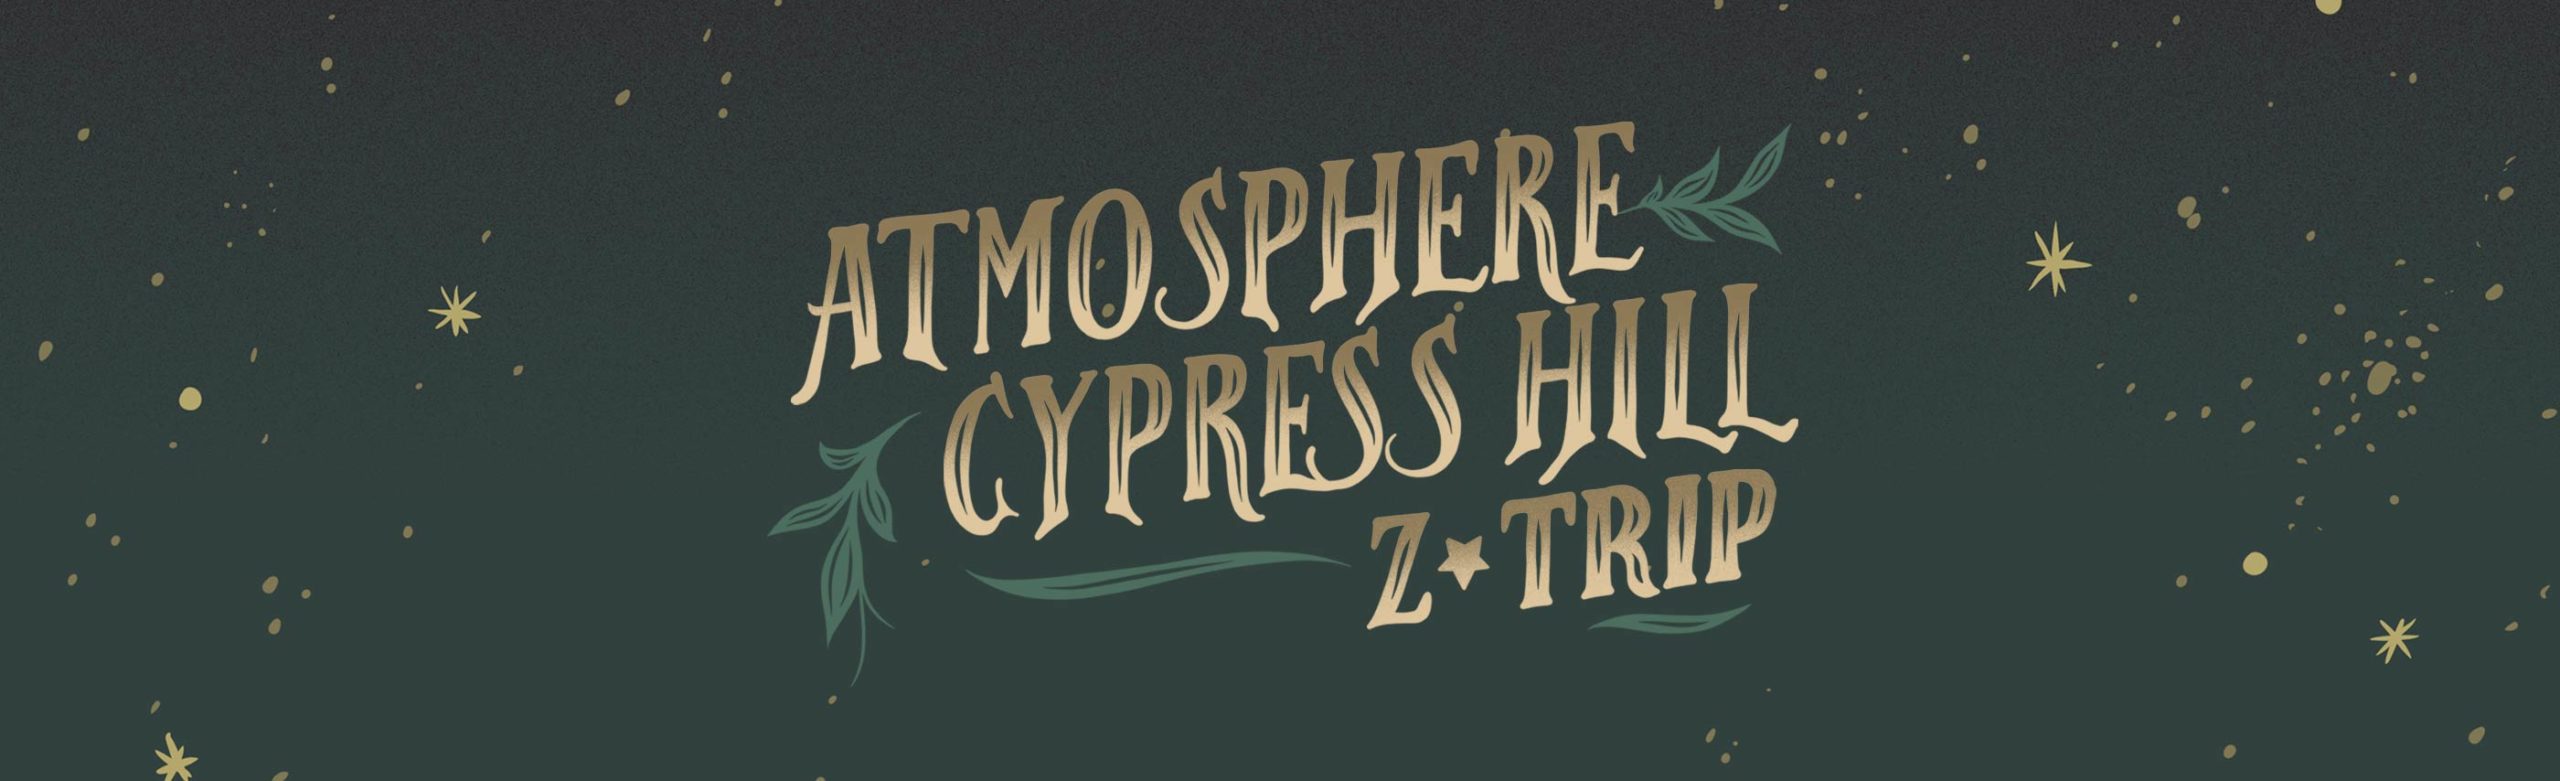 Atmosphere and Cypress Hill Confirm Concert at KettleHouse Amphitheater Image